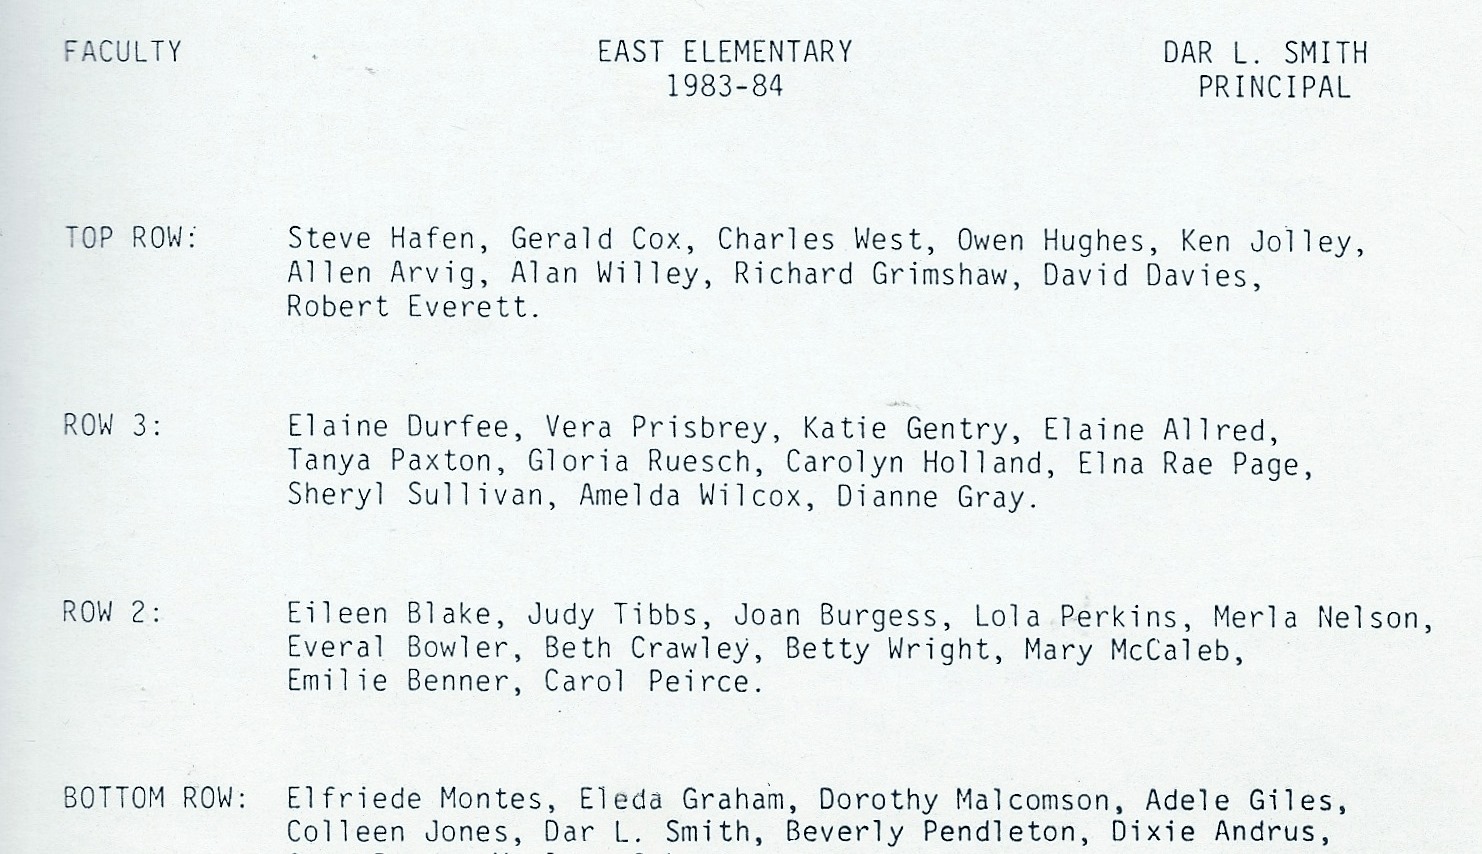 The 1983-1984 faculty names at East Elementary School